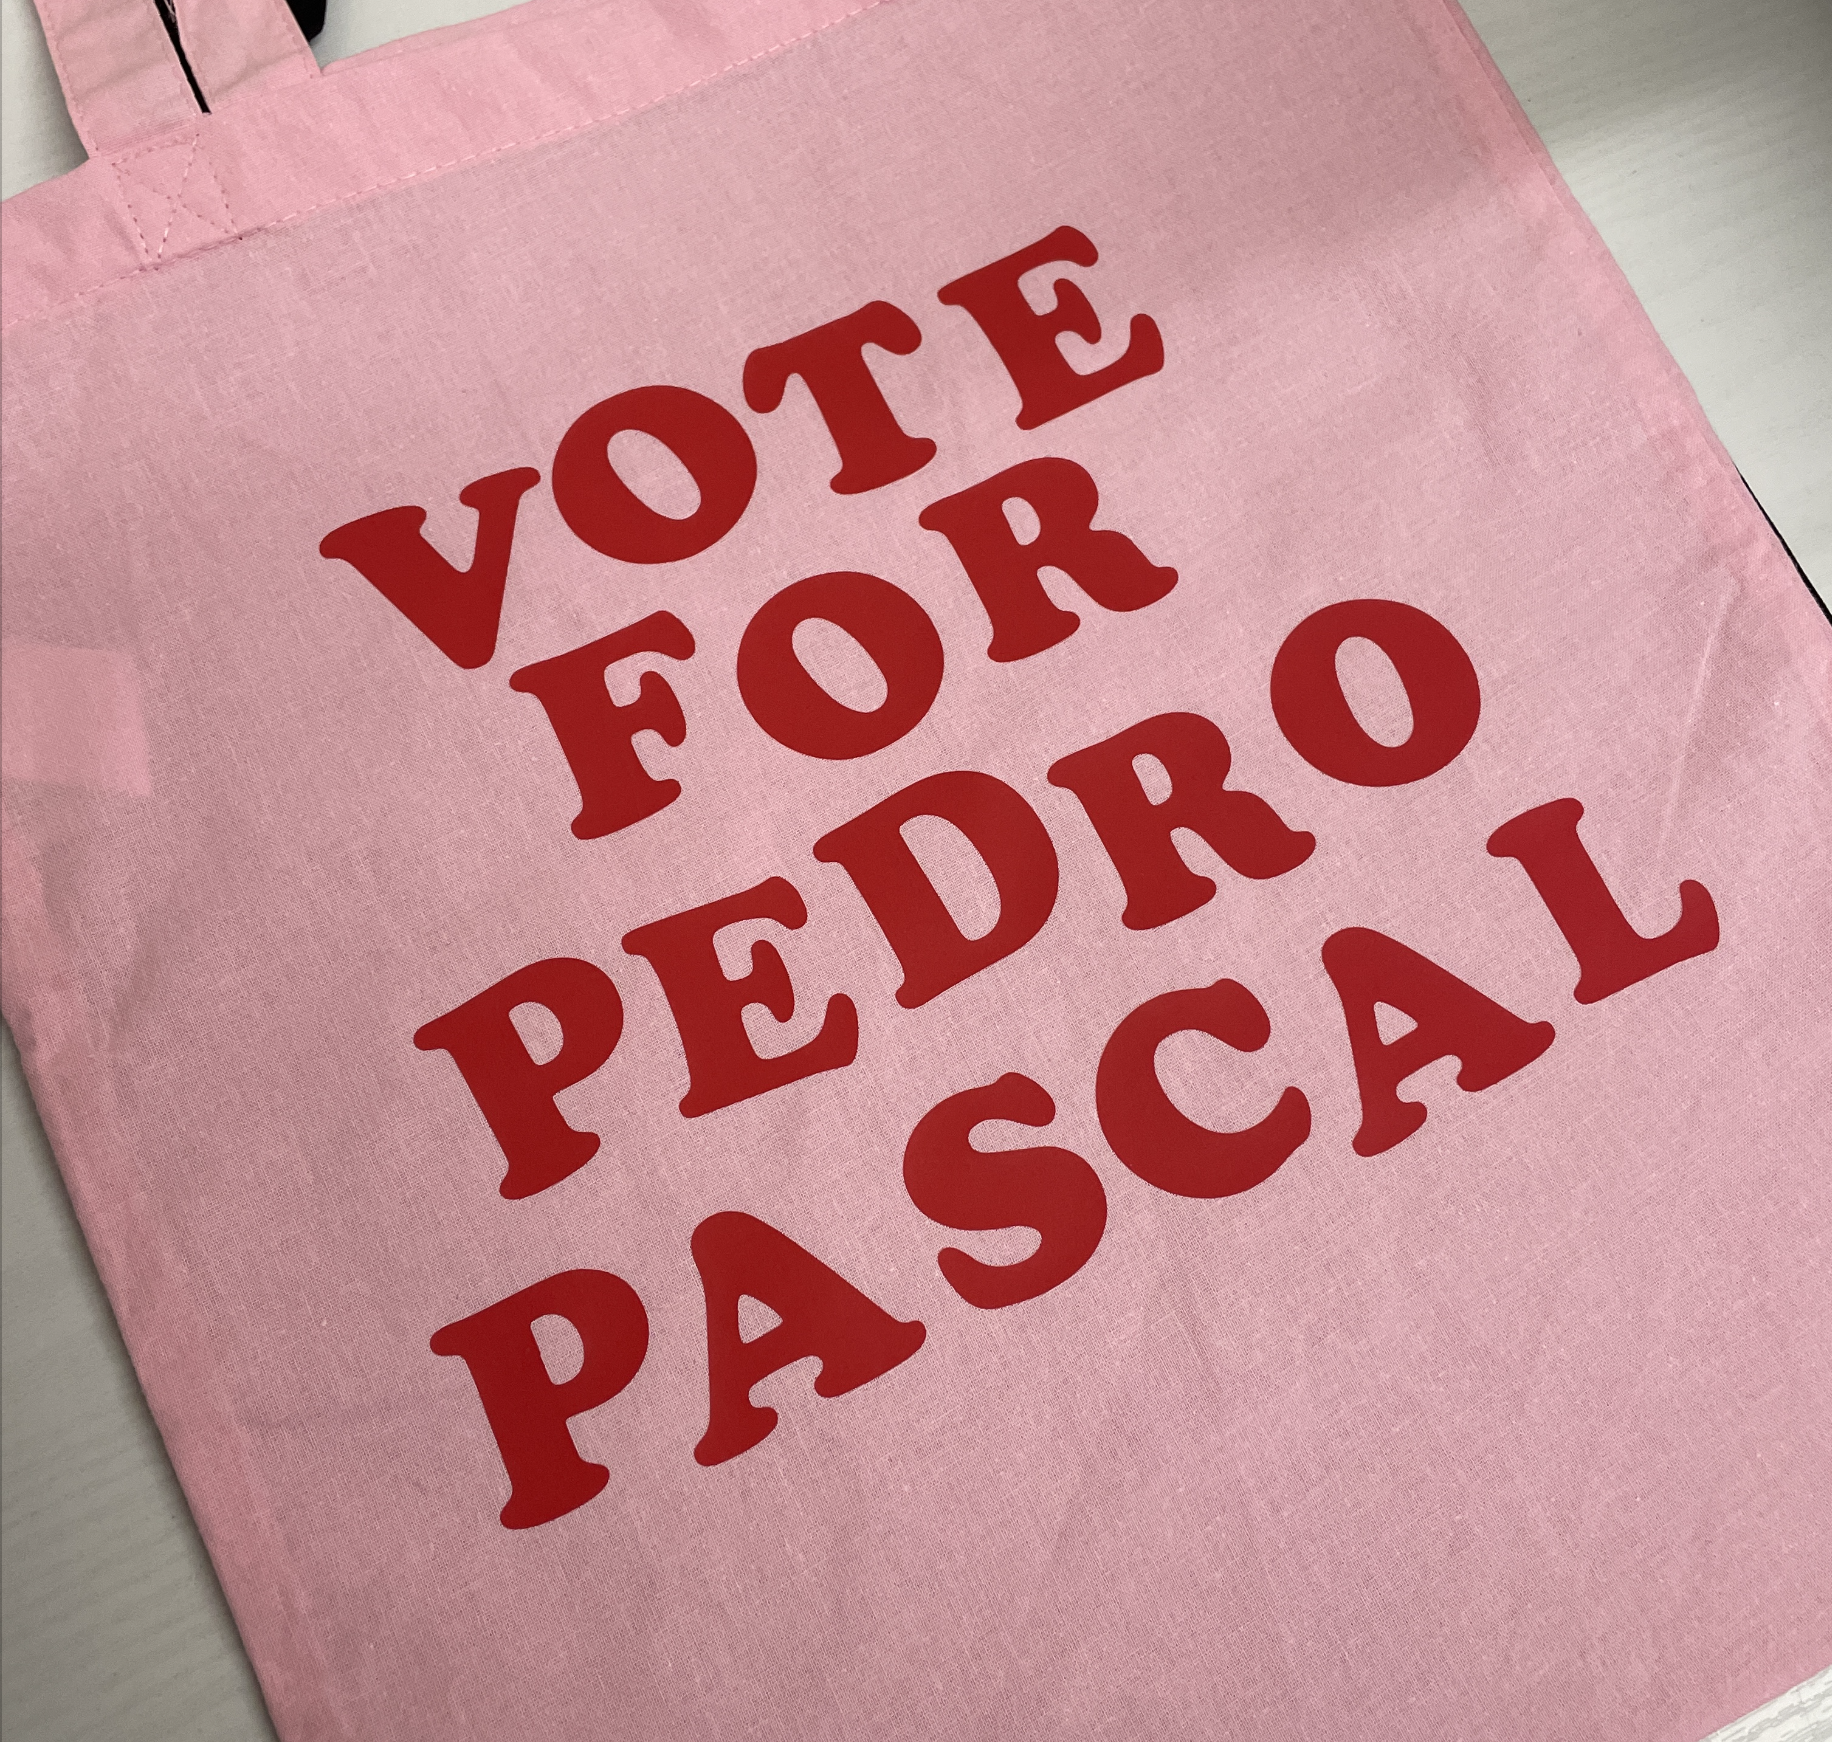 Pedro Pascal Agent Whiskey Cowboy Pink Tote Bag 100% Cotton